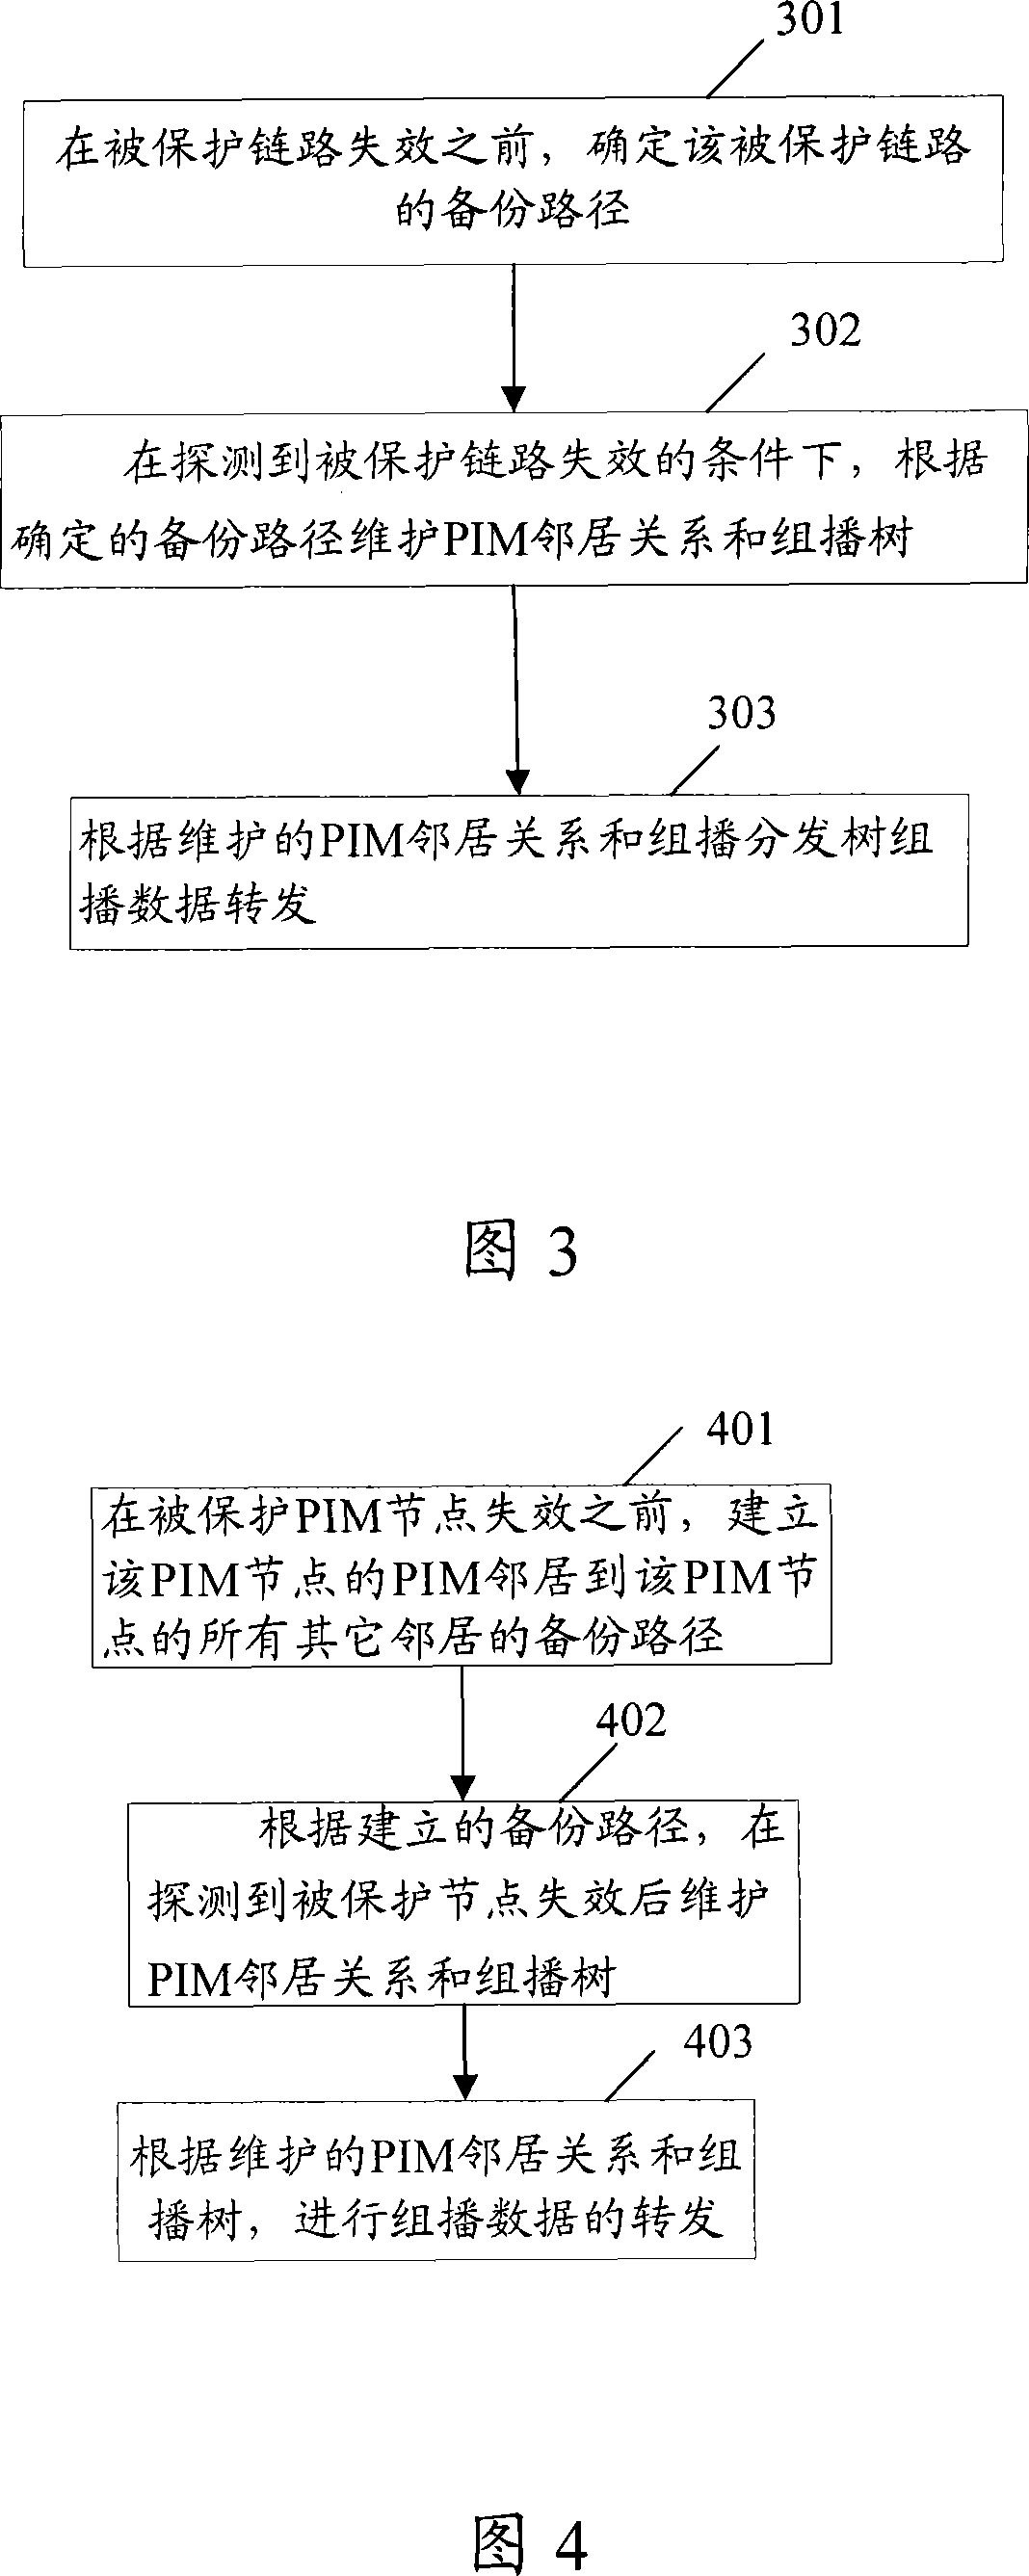 Method of implementing fast rerouting